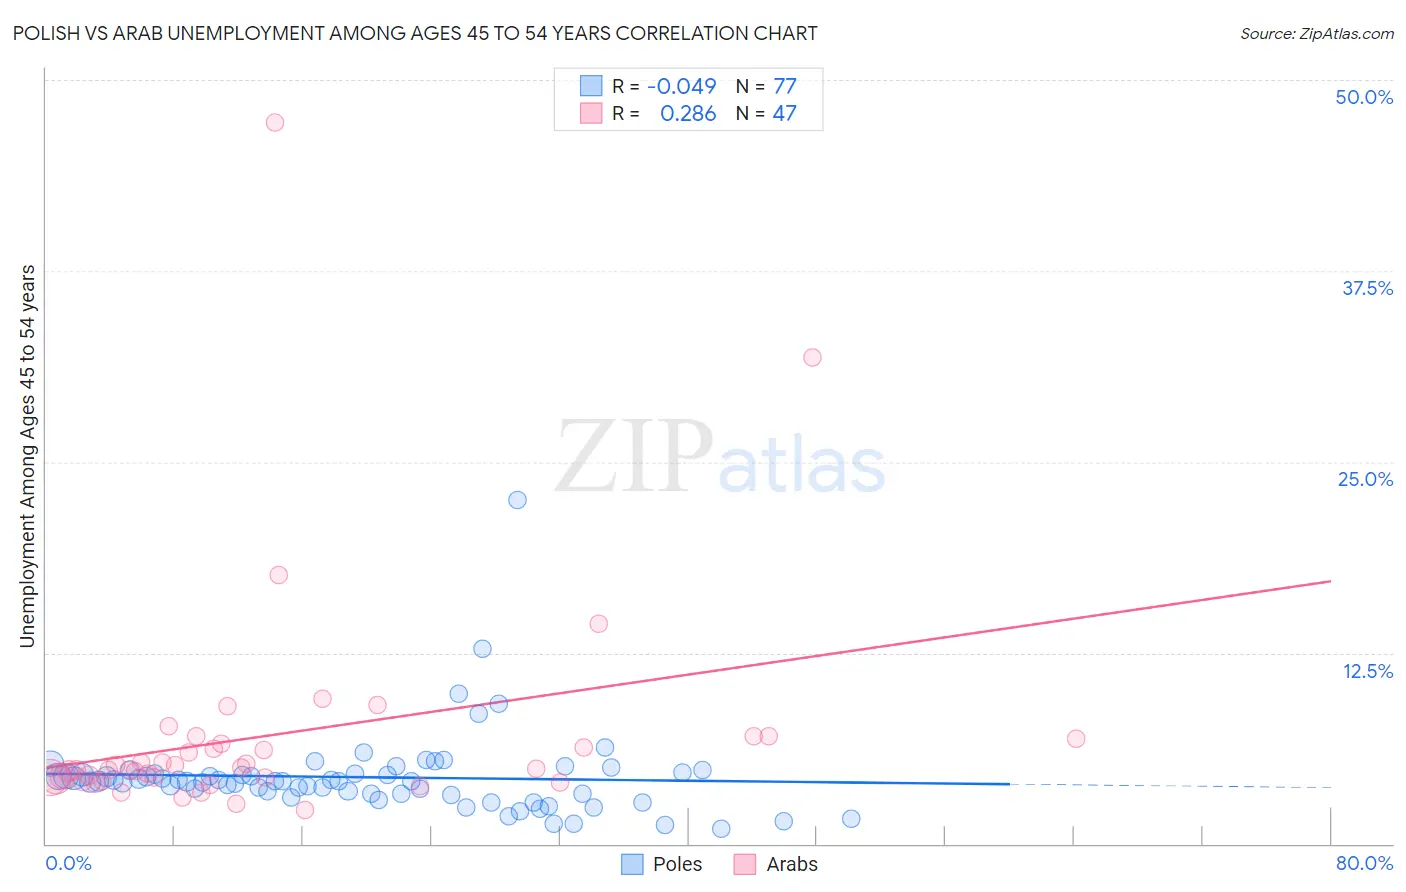 Polish vs Arab Unemployment Among Ages 45 to 54 years